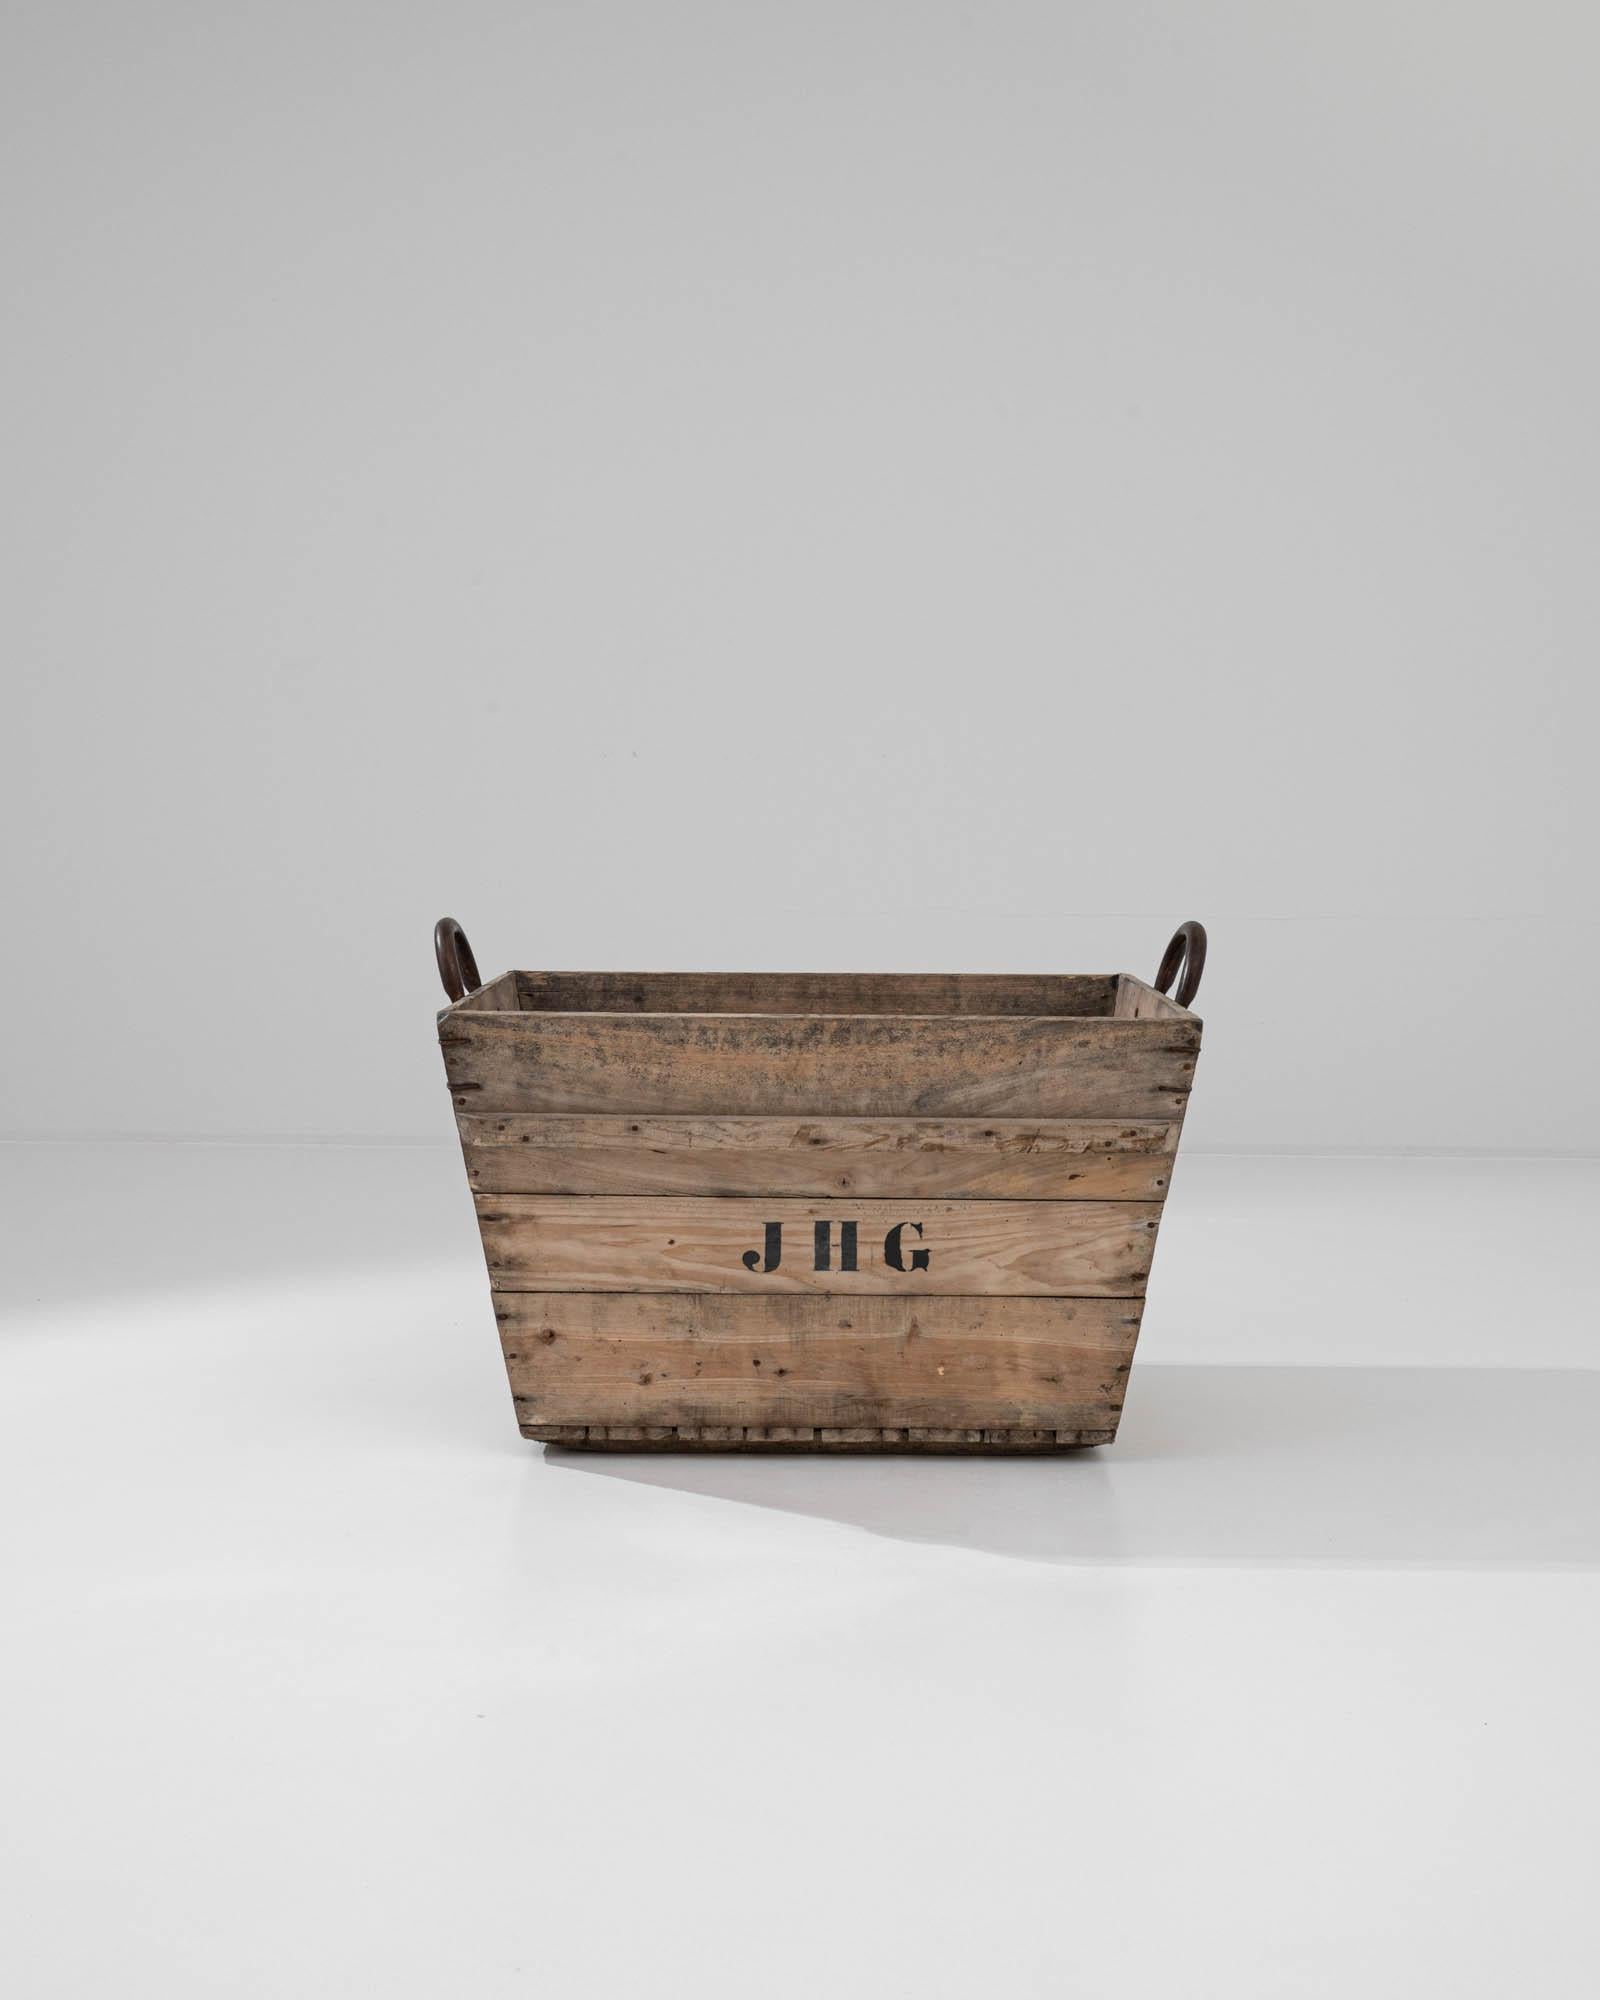 A tangible artifact of the past, this antique grape crate reflects the authentic practices of winemaking and grape harvesting in early 20th-century France. Equipped with sturdy metal handles, the crate features a practical rectangular shape with the